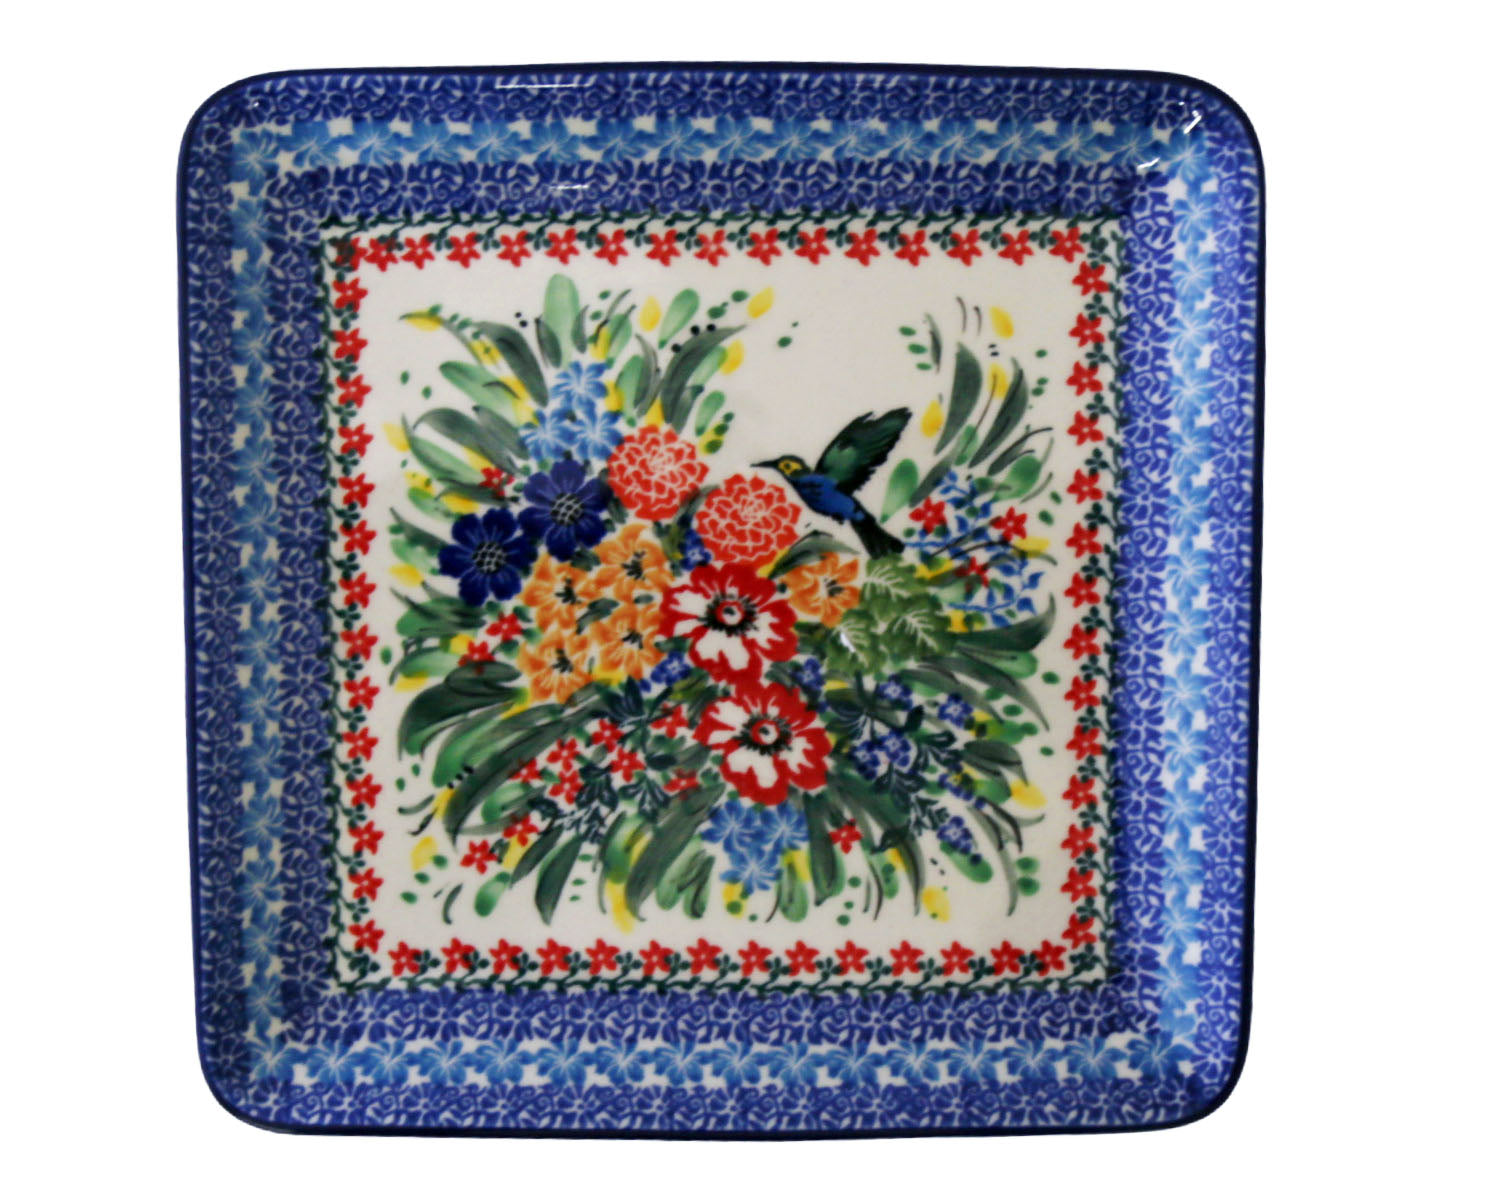 Unikat Square Plate or Tray